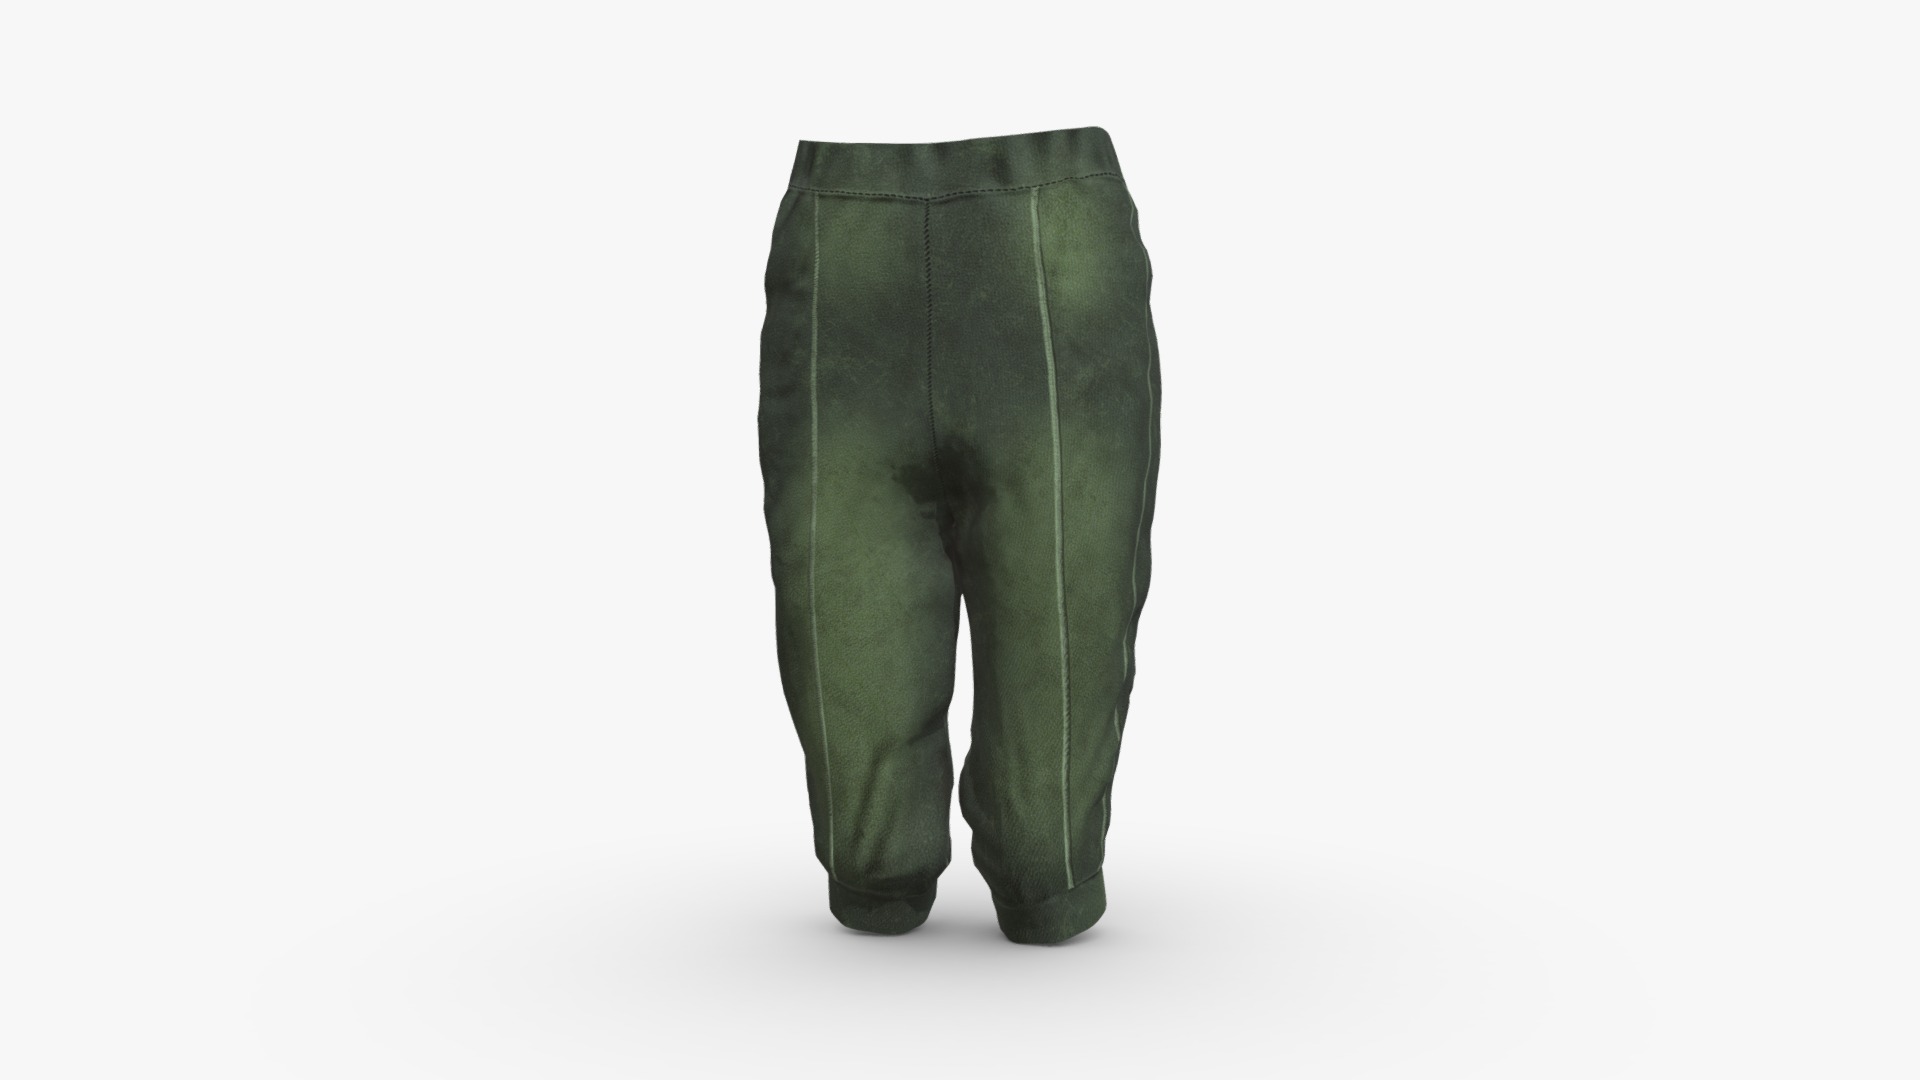 3D model Four Part Pirate Pants - This is a 3D model of the Four Part Pirate Pants. The 3D model is about a green backpack on a white background.